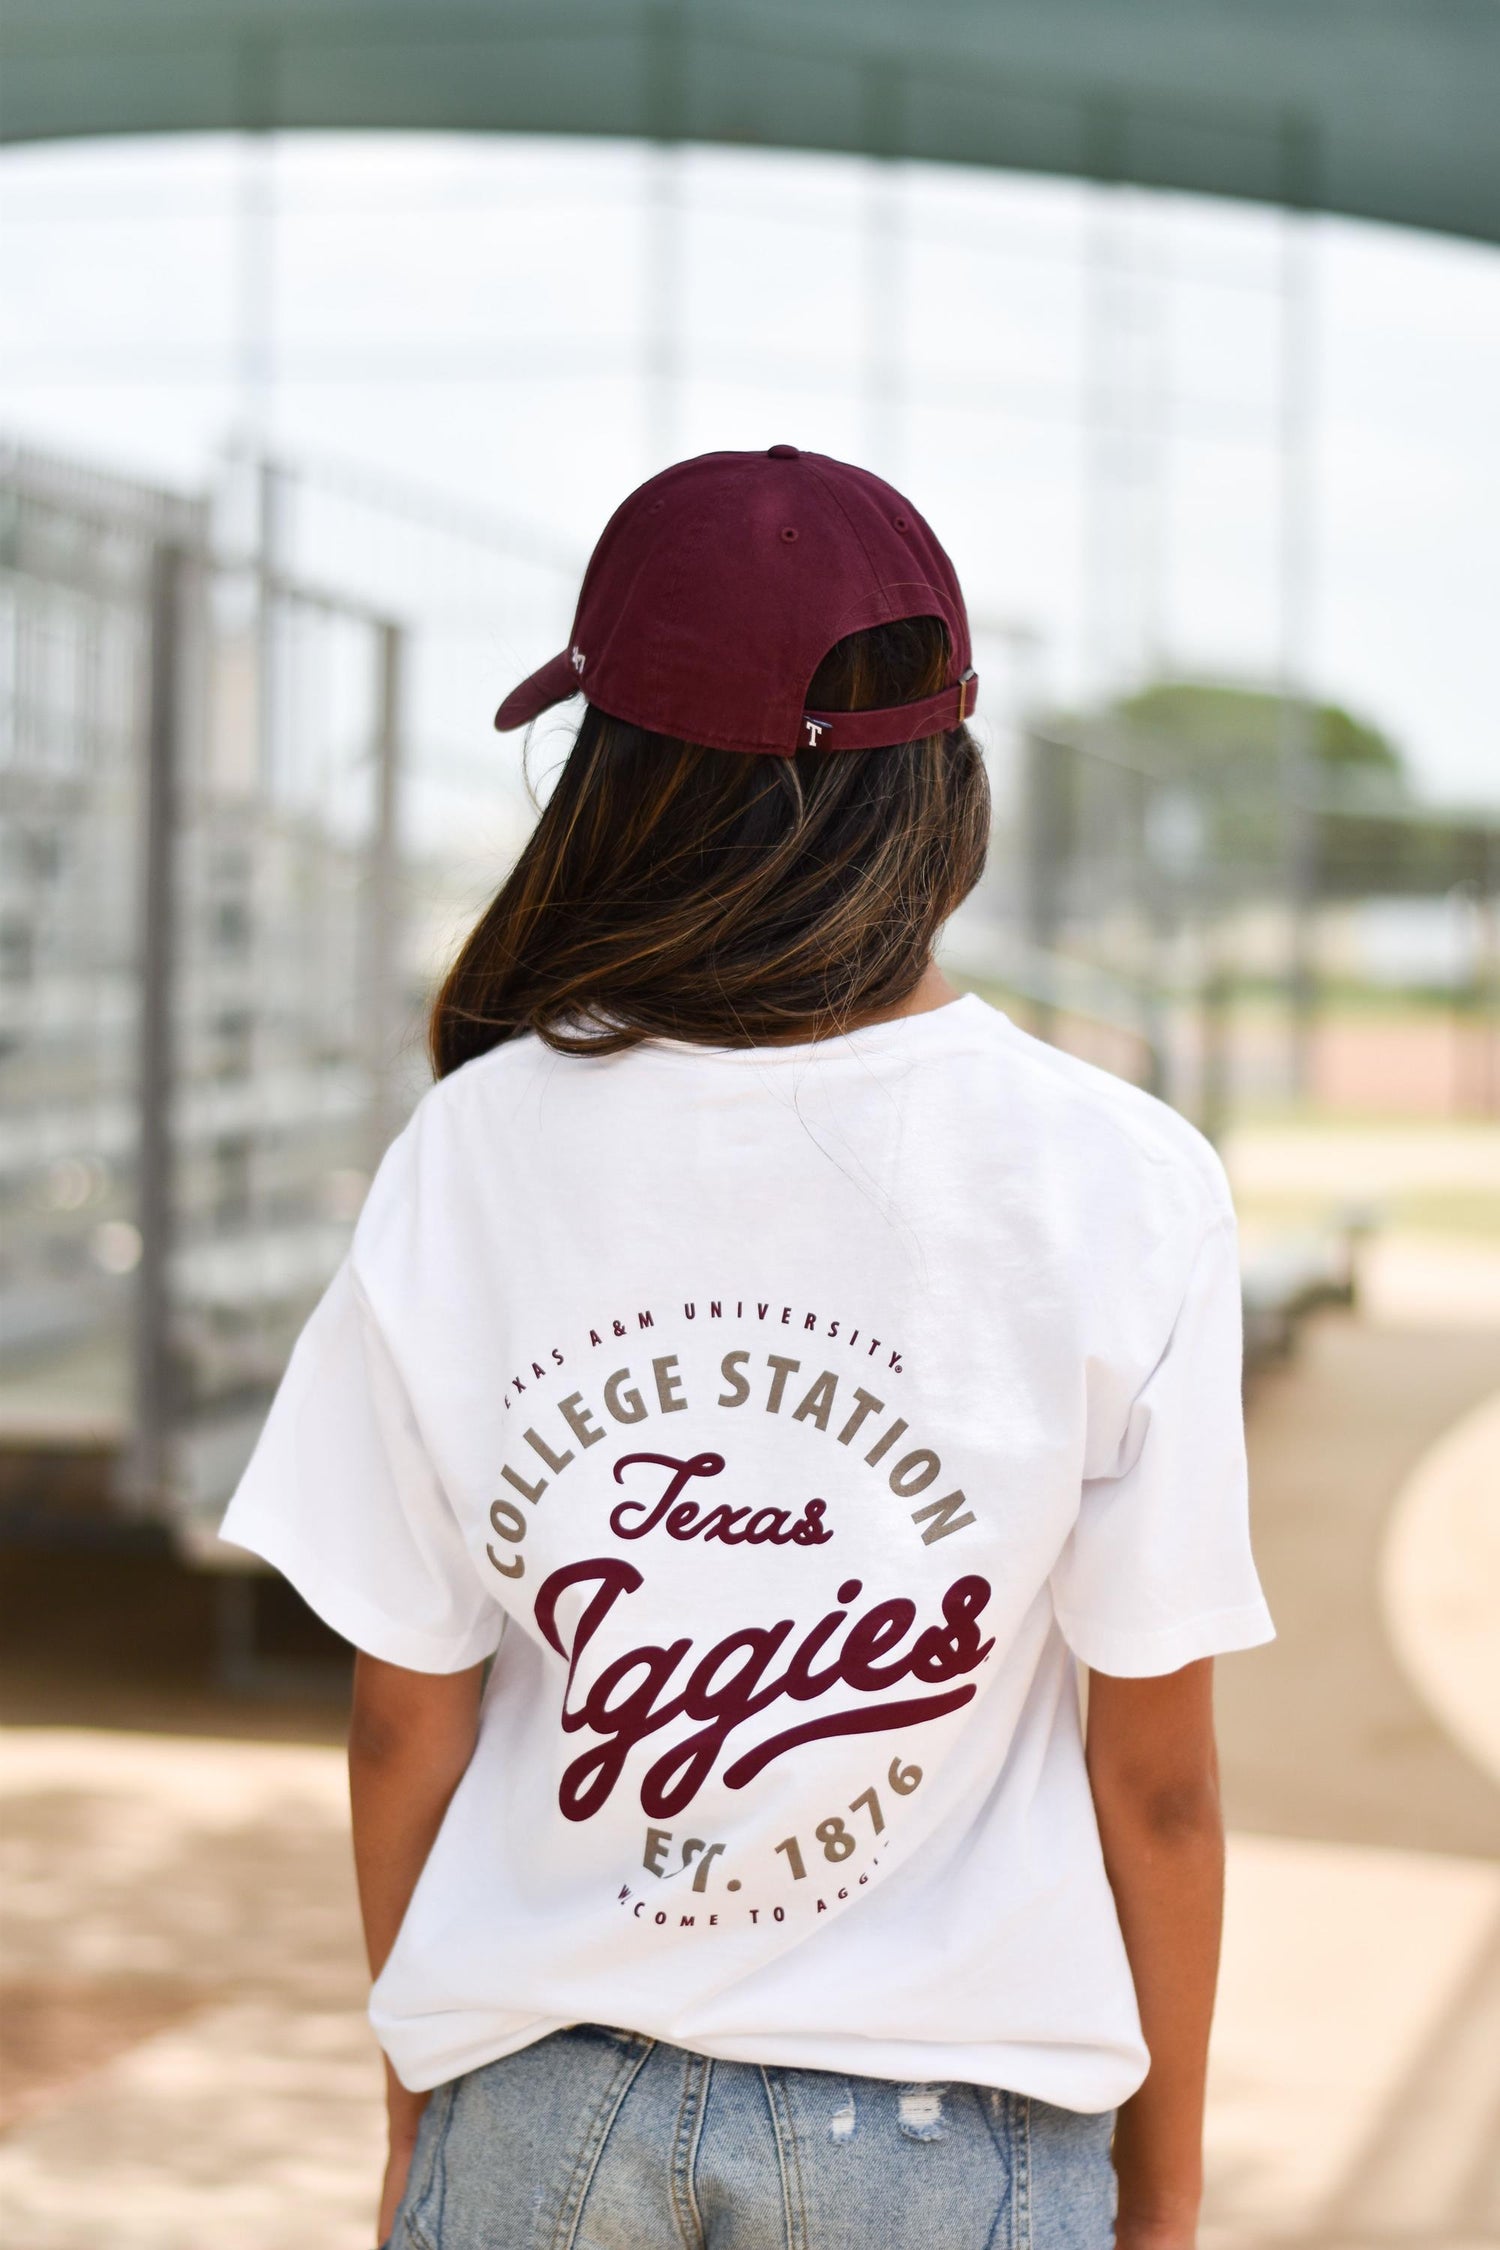 Aggies T-Shirts for Sale